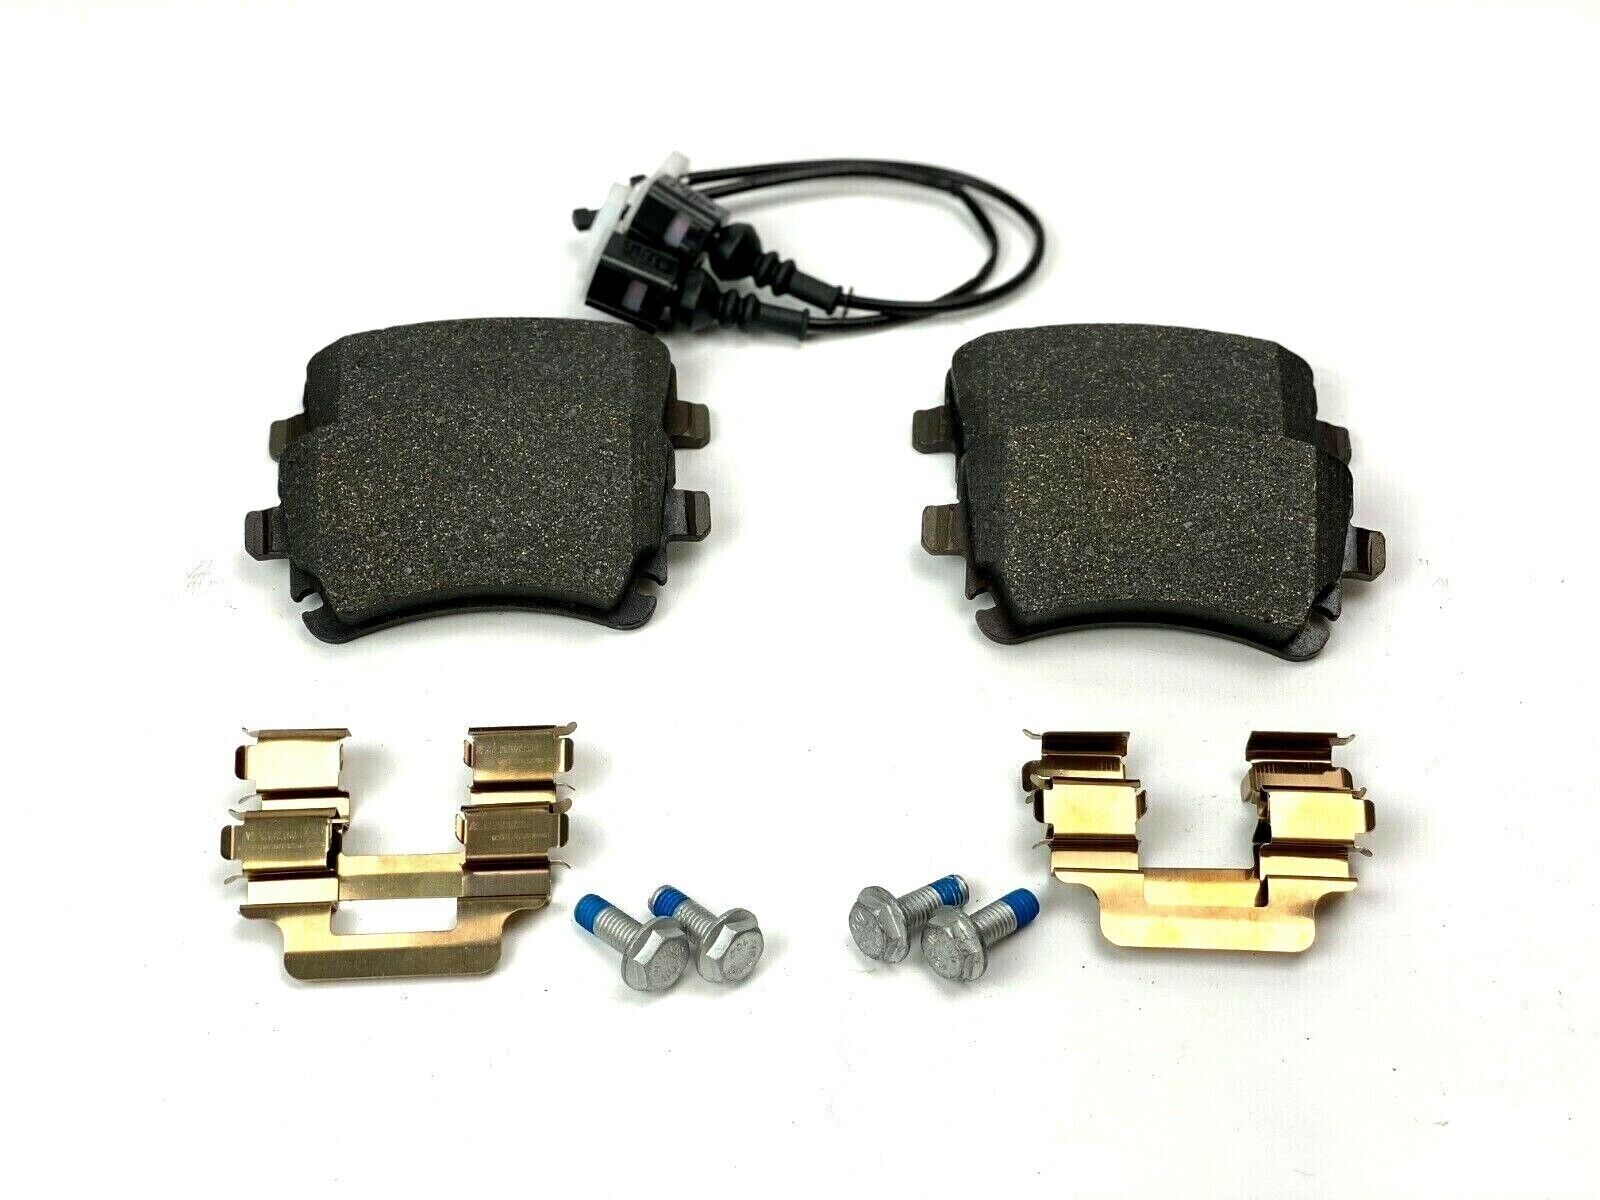 Bentley Continental Gt, Gtc & Flying Spur Rear Brake Pads Kit - High Quality